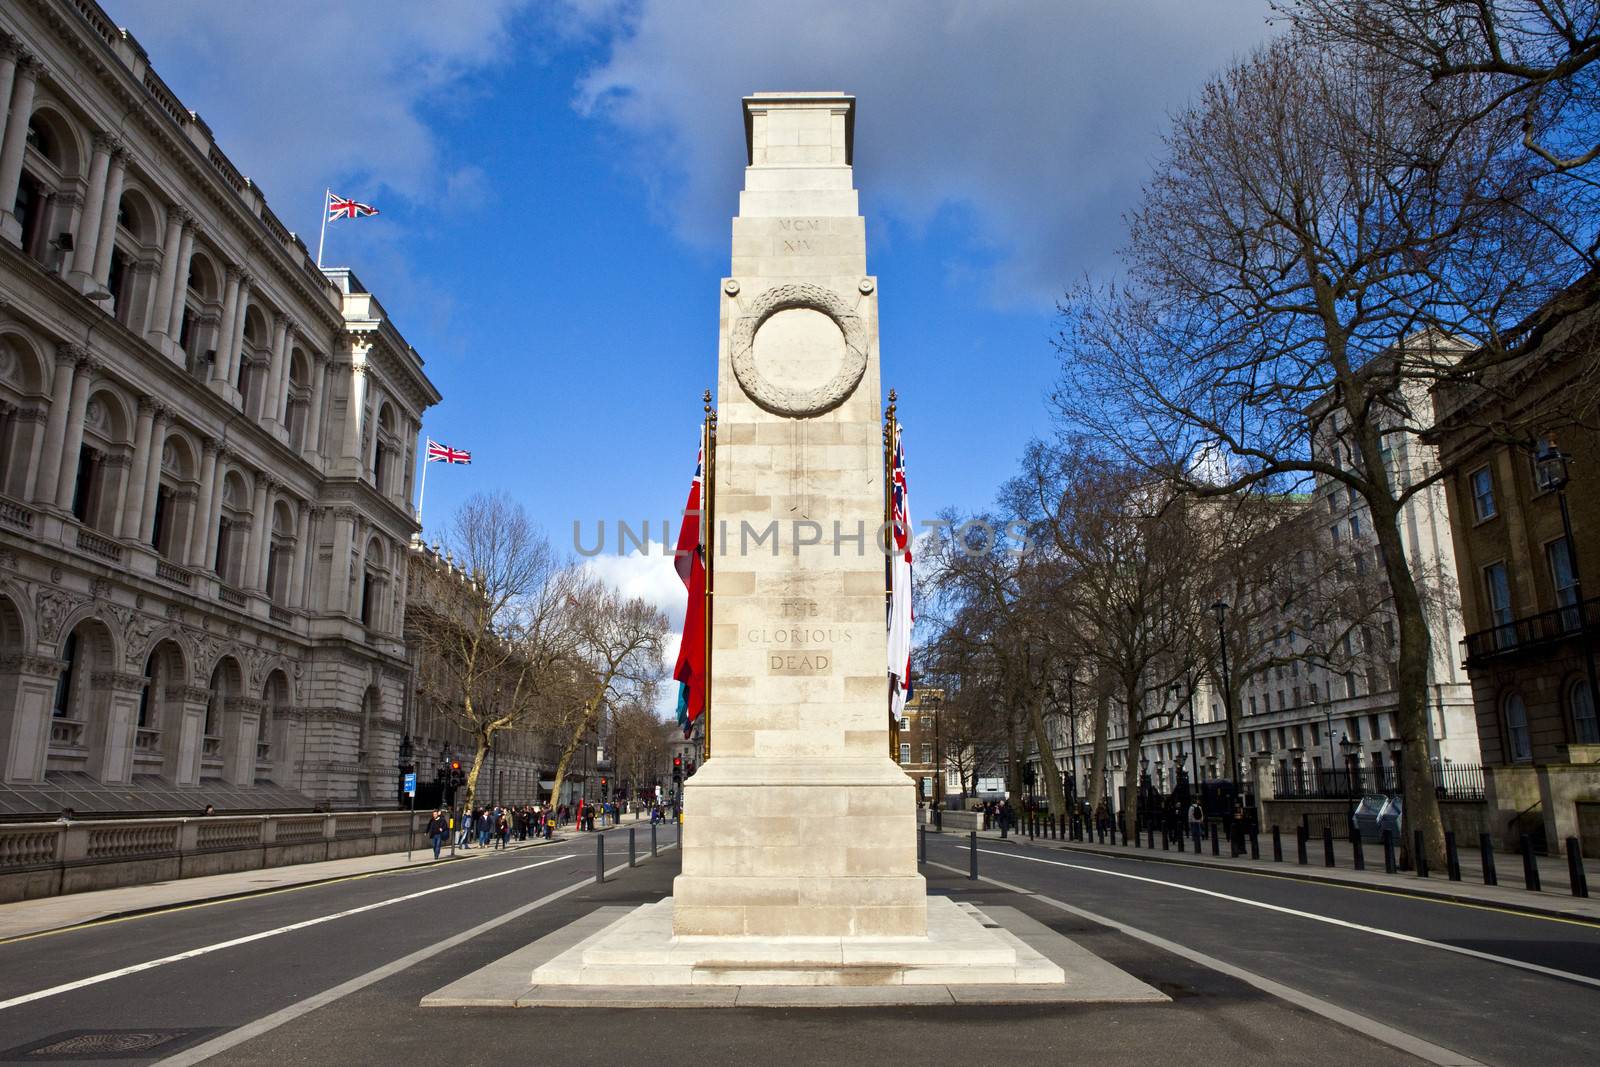 The Cenotaph War Memorial in Whitehall, London.